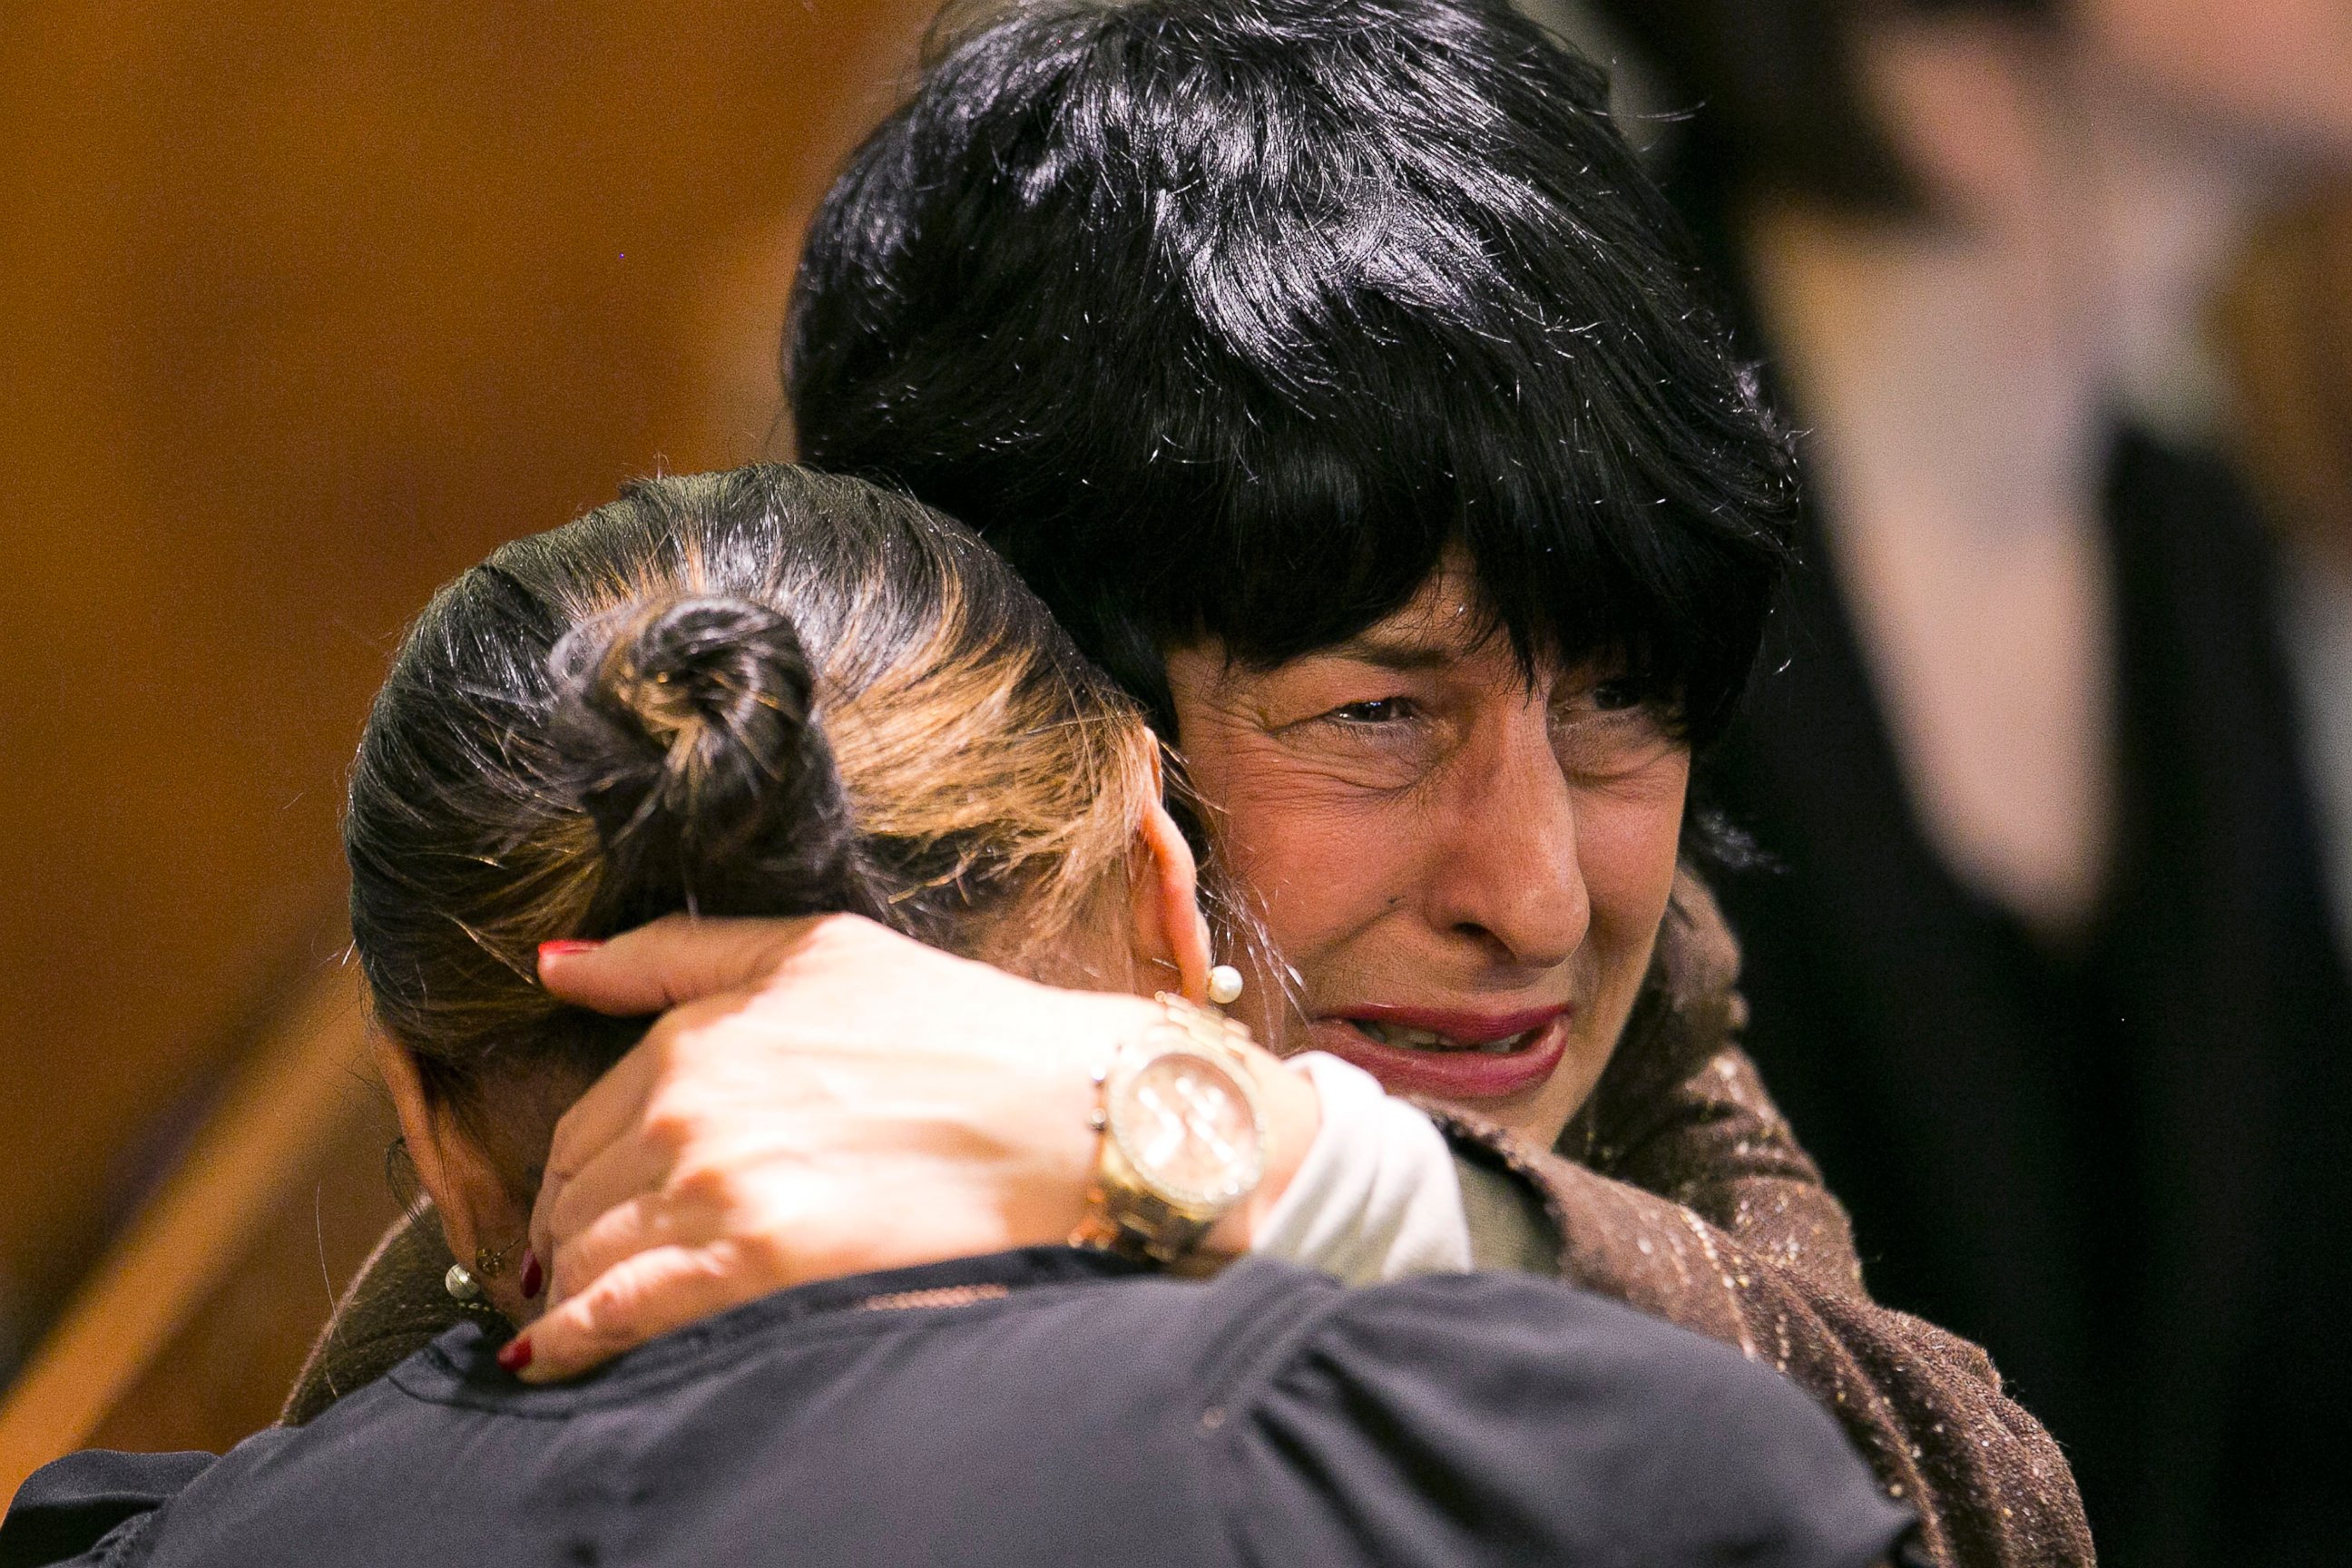 PHOTO: Terri Hernandez, mother of former New England Patriots football player Aaron Hernandez hugs Shayanna Jenkins, Hernandez's fiancee, as the guilty verdict is read at the Bristol County Superior Court in Fall River, Mass., April 15, 2015.